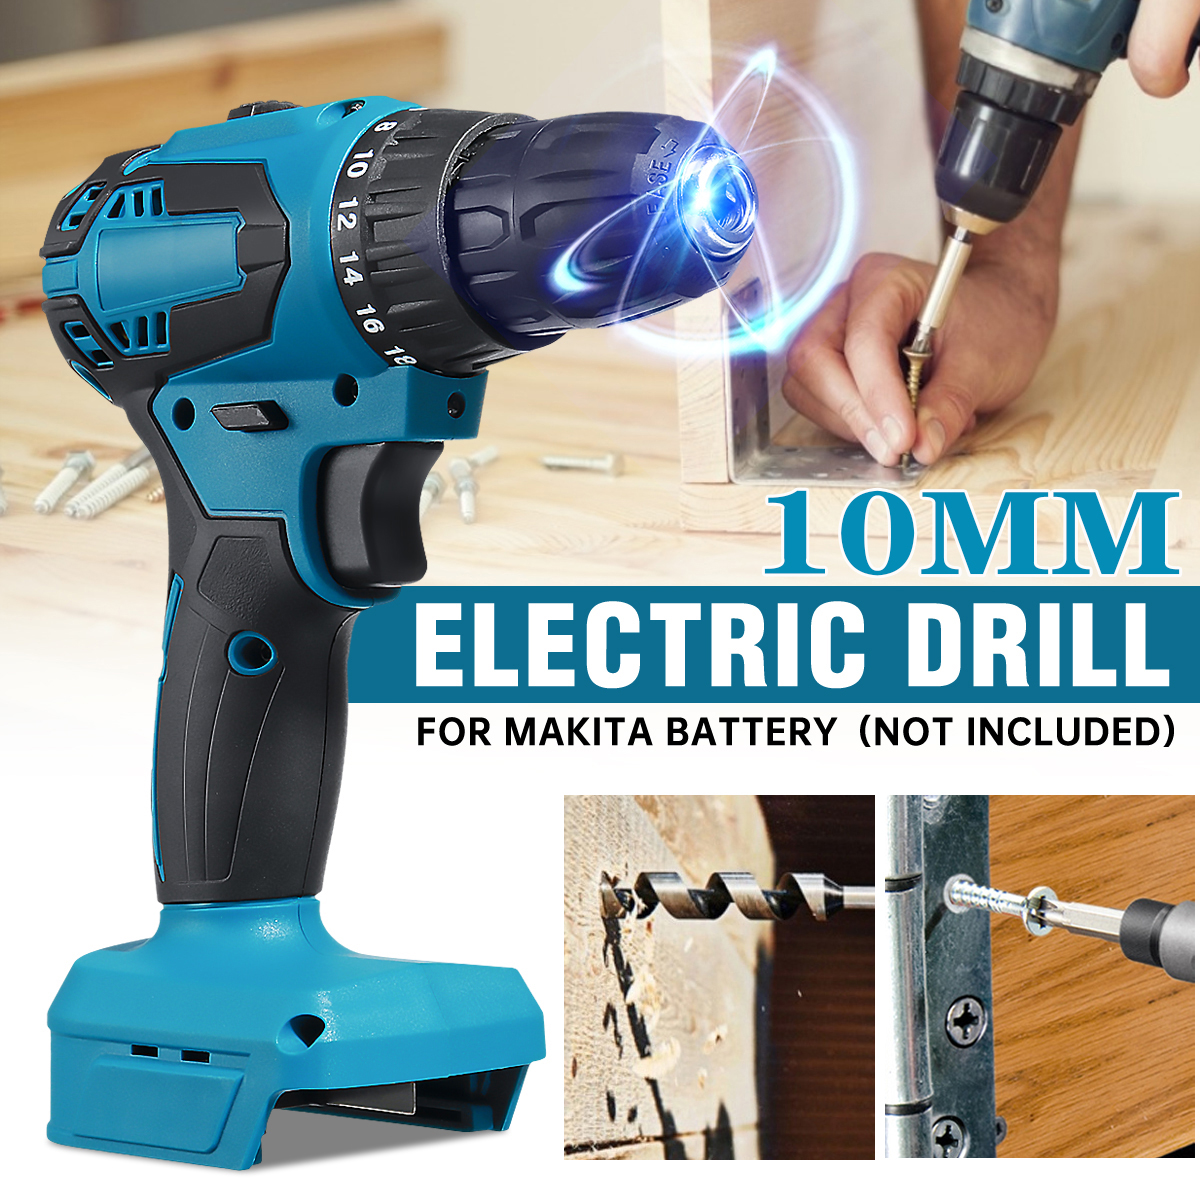 10mm-Rechargable-Electric-Drill-Screwdriver-1350RPM-2-Speed-Impact-Hand-Drill-Fit-Makita-Battery-1882944-3